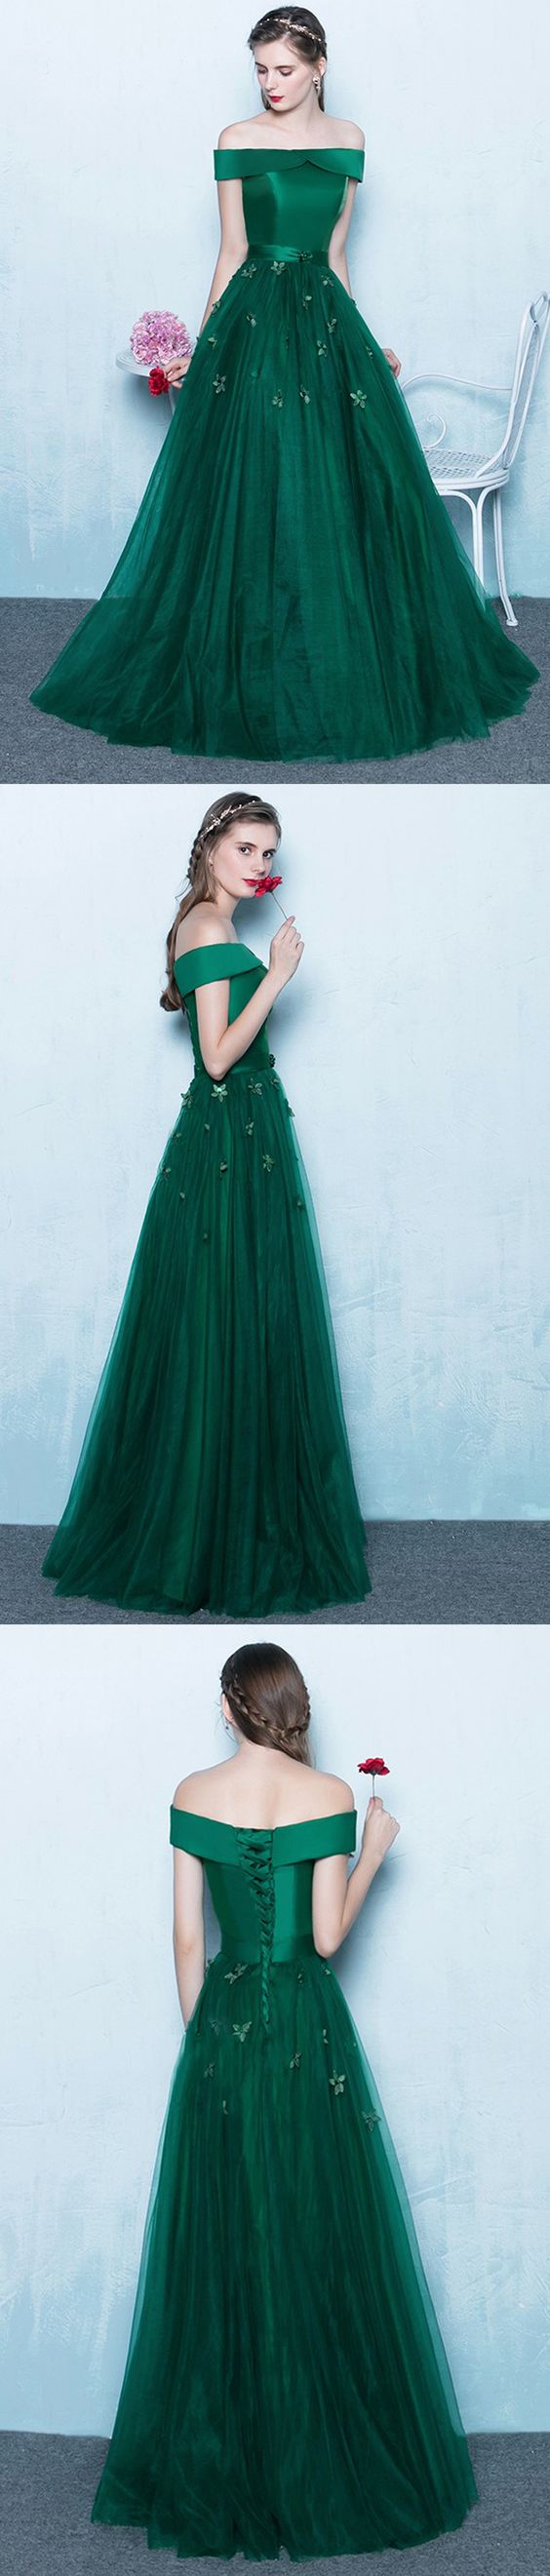 Green Off Shoulder Lace Up Back Appliques Party For Teens Prom Gown Dresses M0792